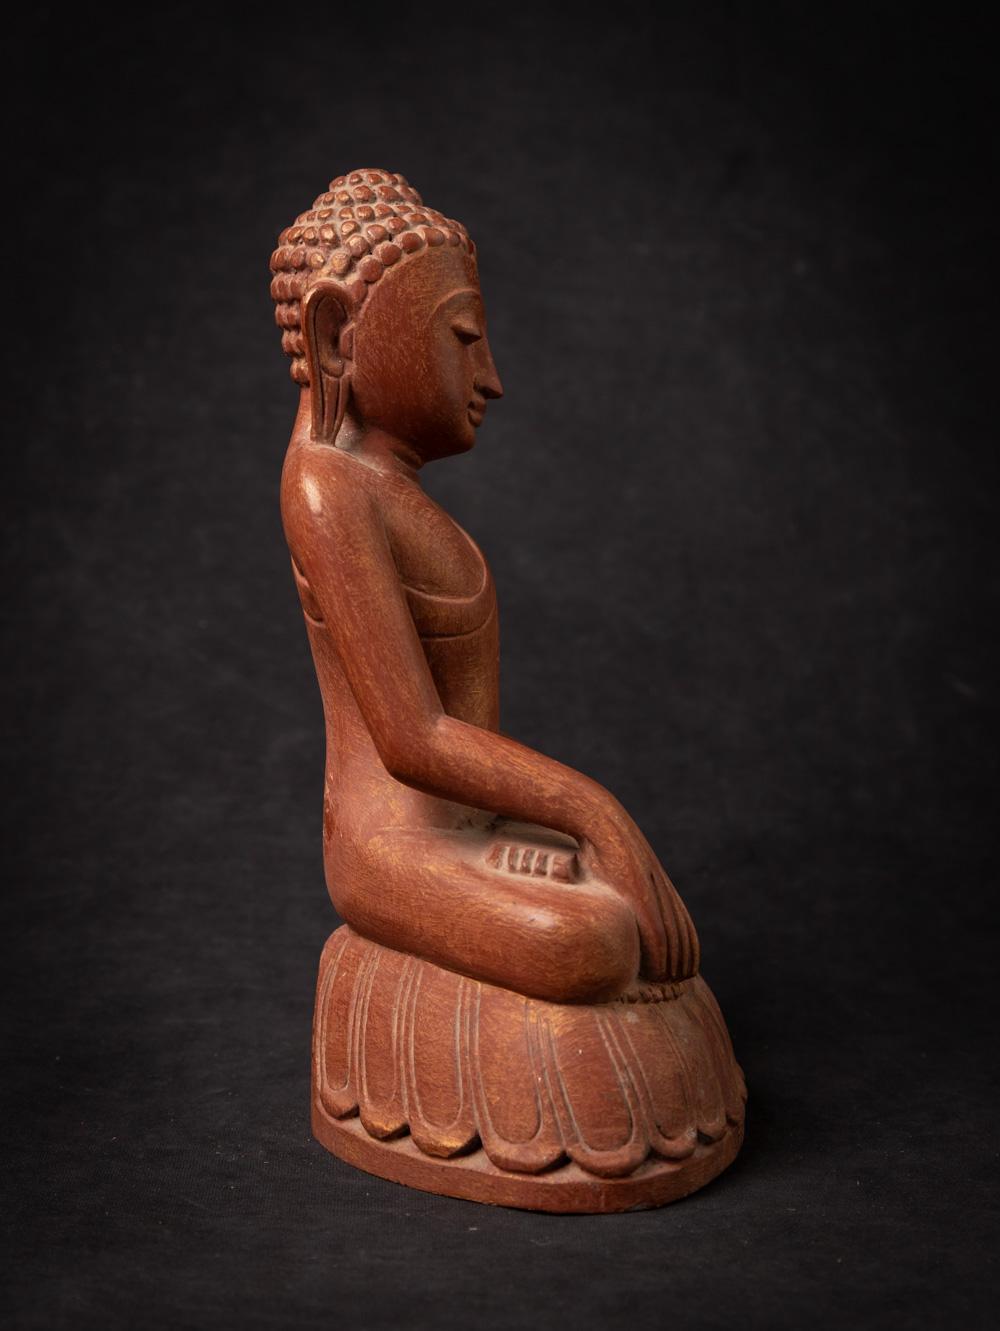 The old wooden Burmese Mandalay Buddha statue is a magnificent representation of artistic and spiritual craftsmanship. Crafted from wood, this statue stands 26,6 cm tall, with dimensions of 17,5 cm in width and 12 cm in depth. Its impressive size